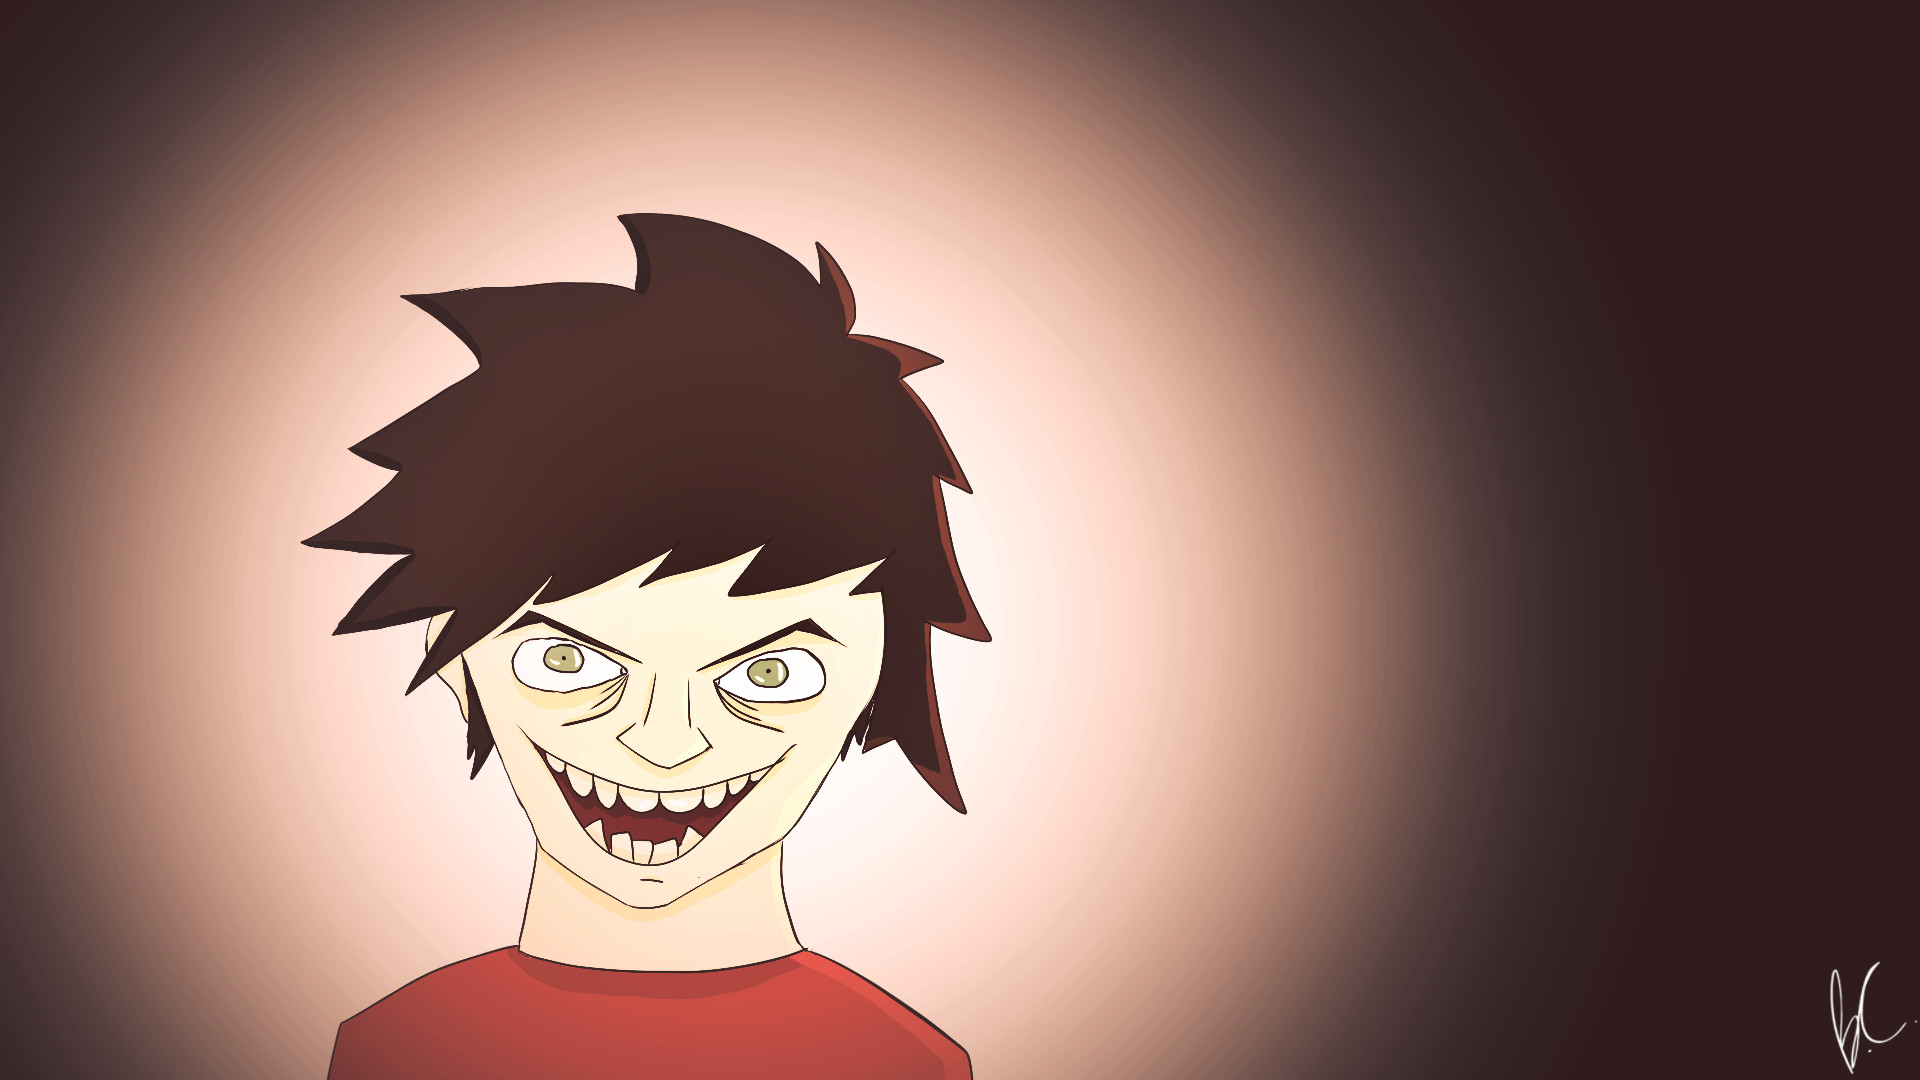 1920x1080 The Creeper face by TheGreatBowen The Creeper face by TheGreatBowen